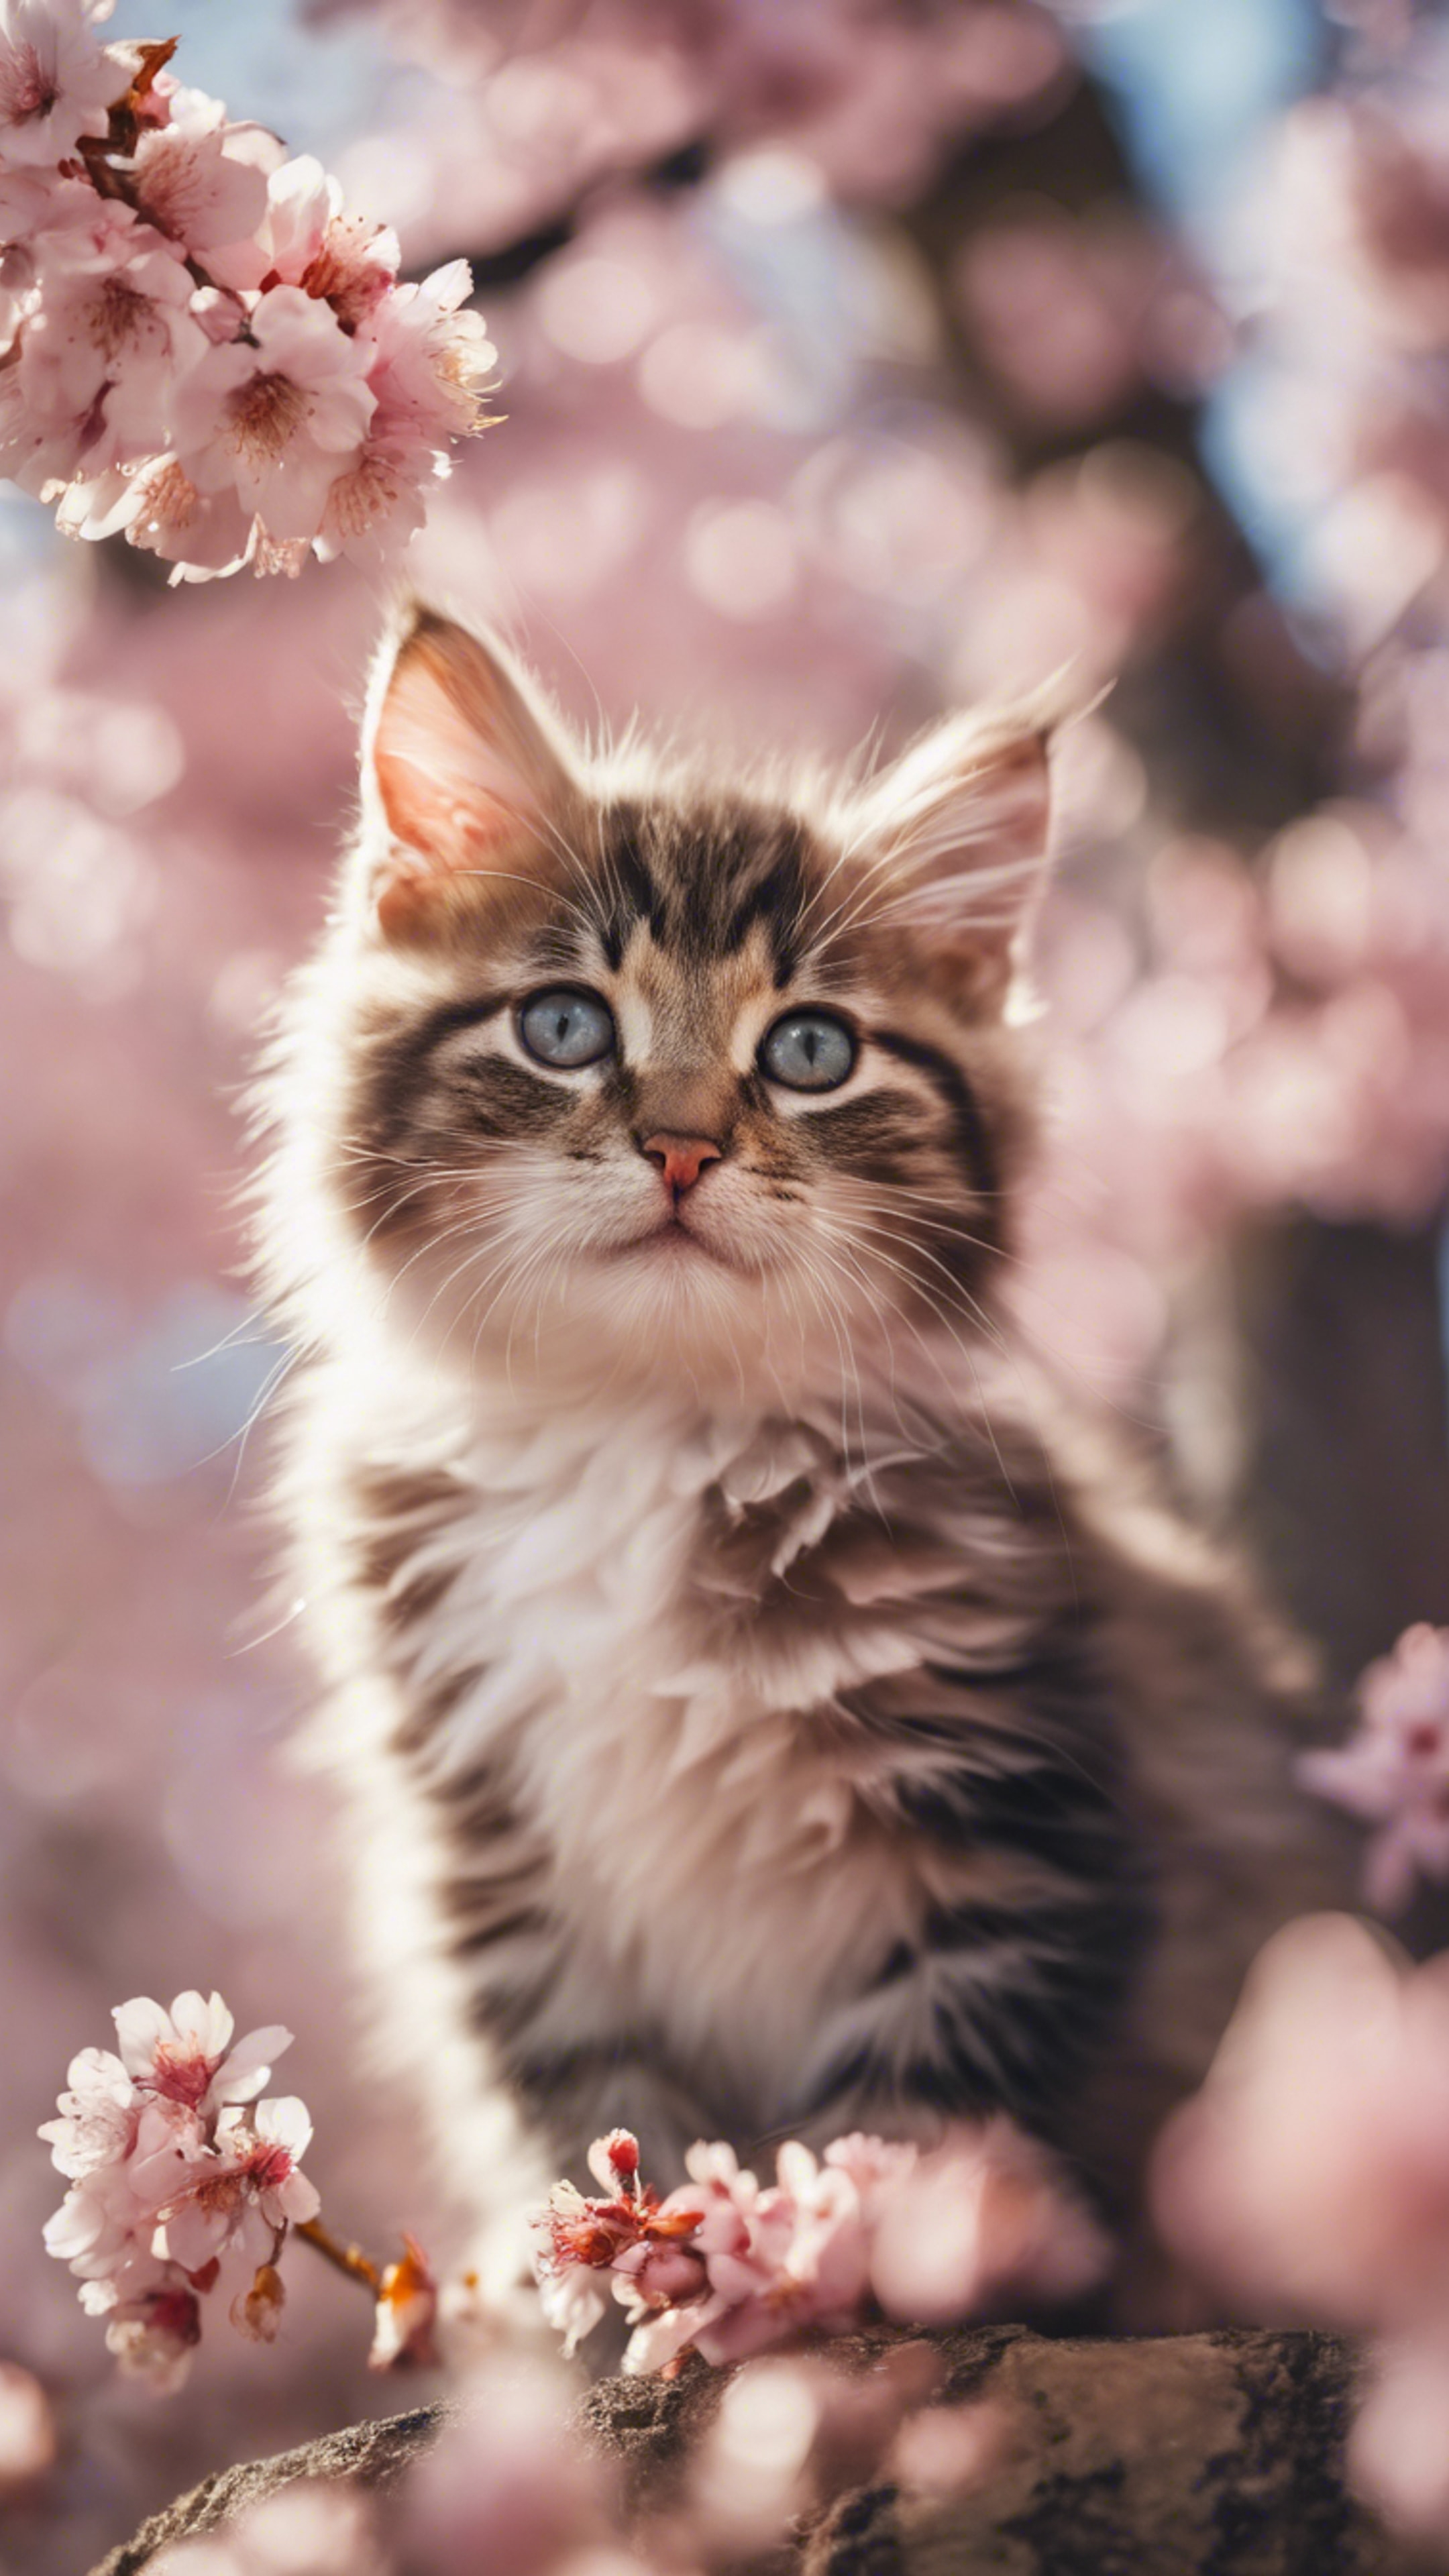 A cherry blossom tree in full bloom as the backdrop to a playful kitten in spring. Tapeet[56e1c1b9132e46d98bd1]